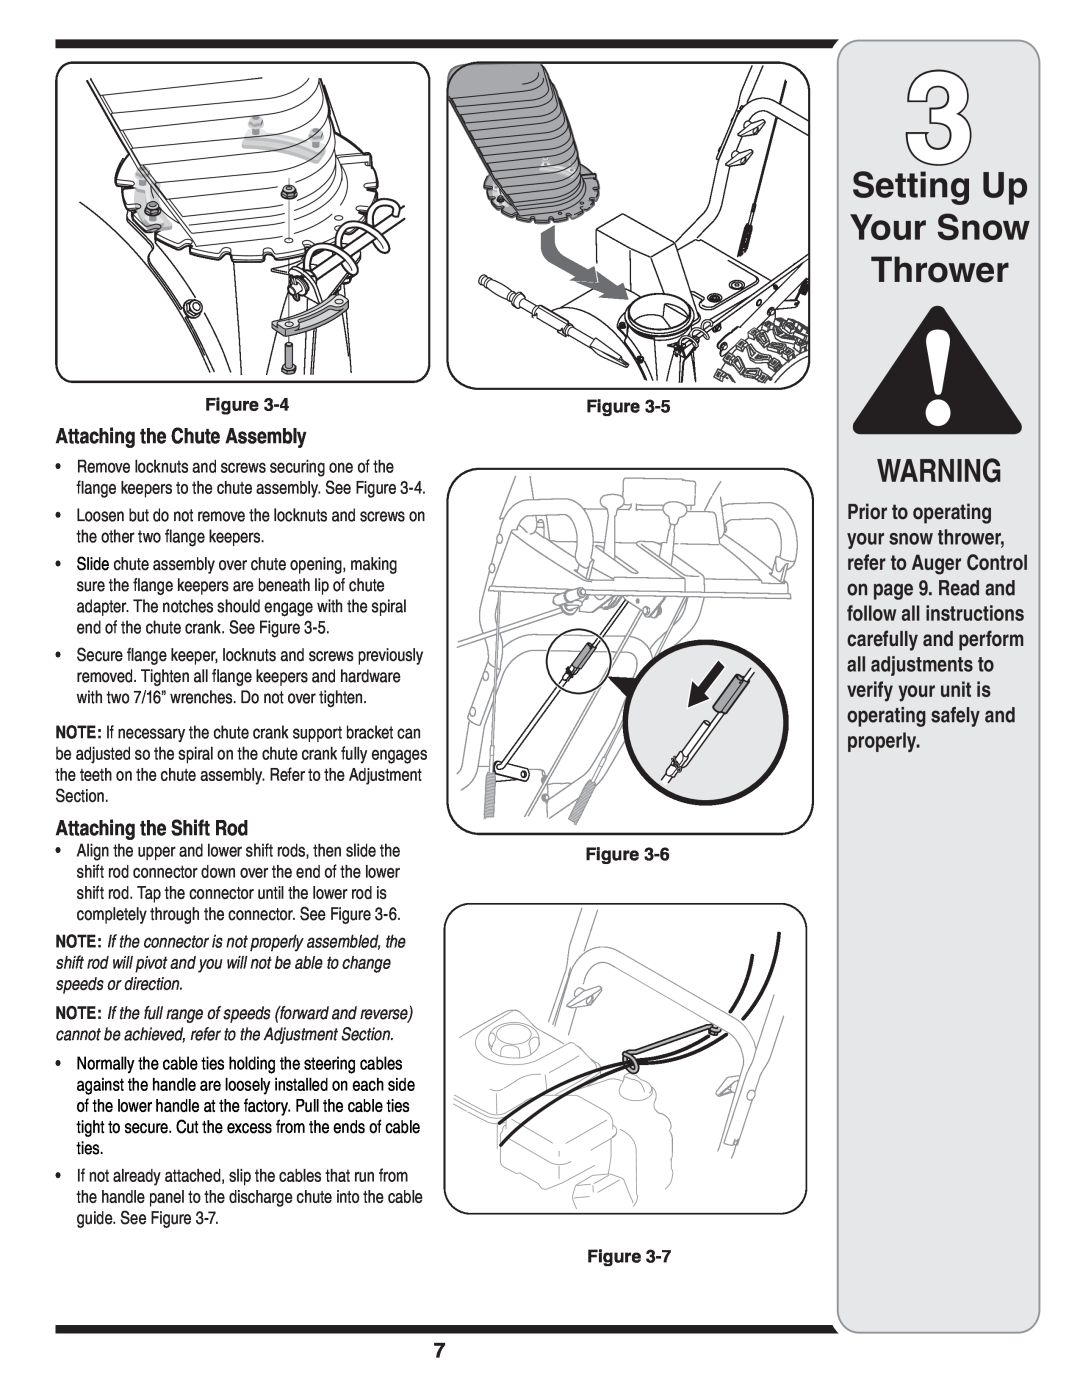 MTD 769-04101 warranty Setting Up Your Snow Thrower, Attaching the Chute Assembly, Attaching the Shift Rod 